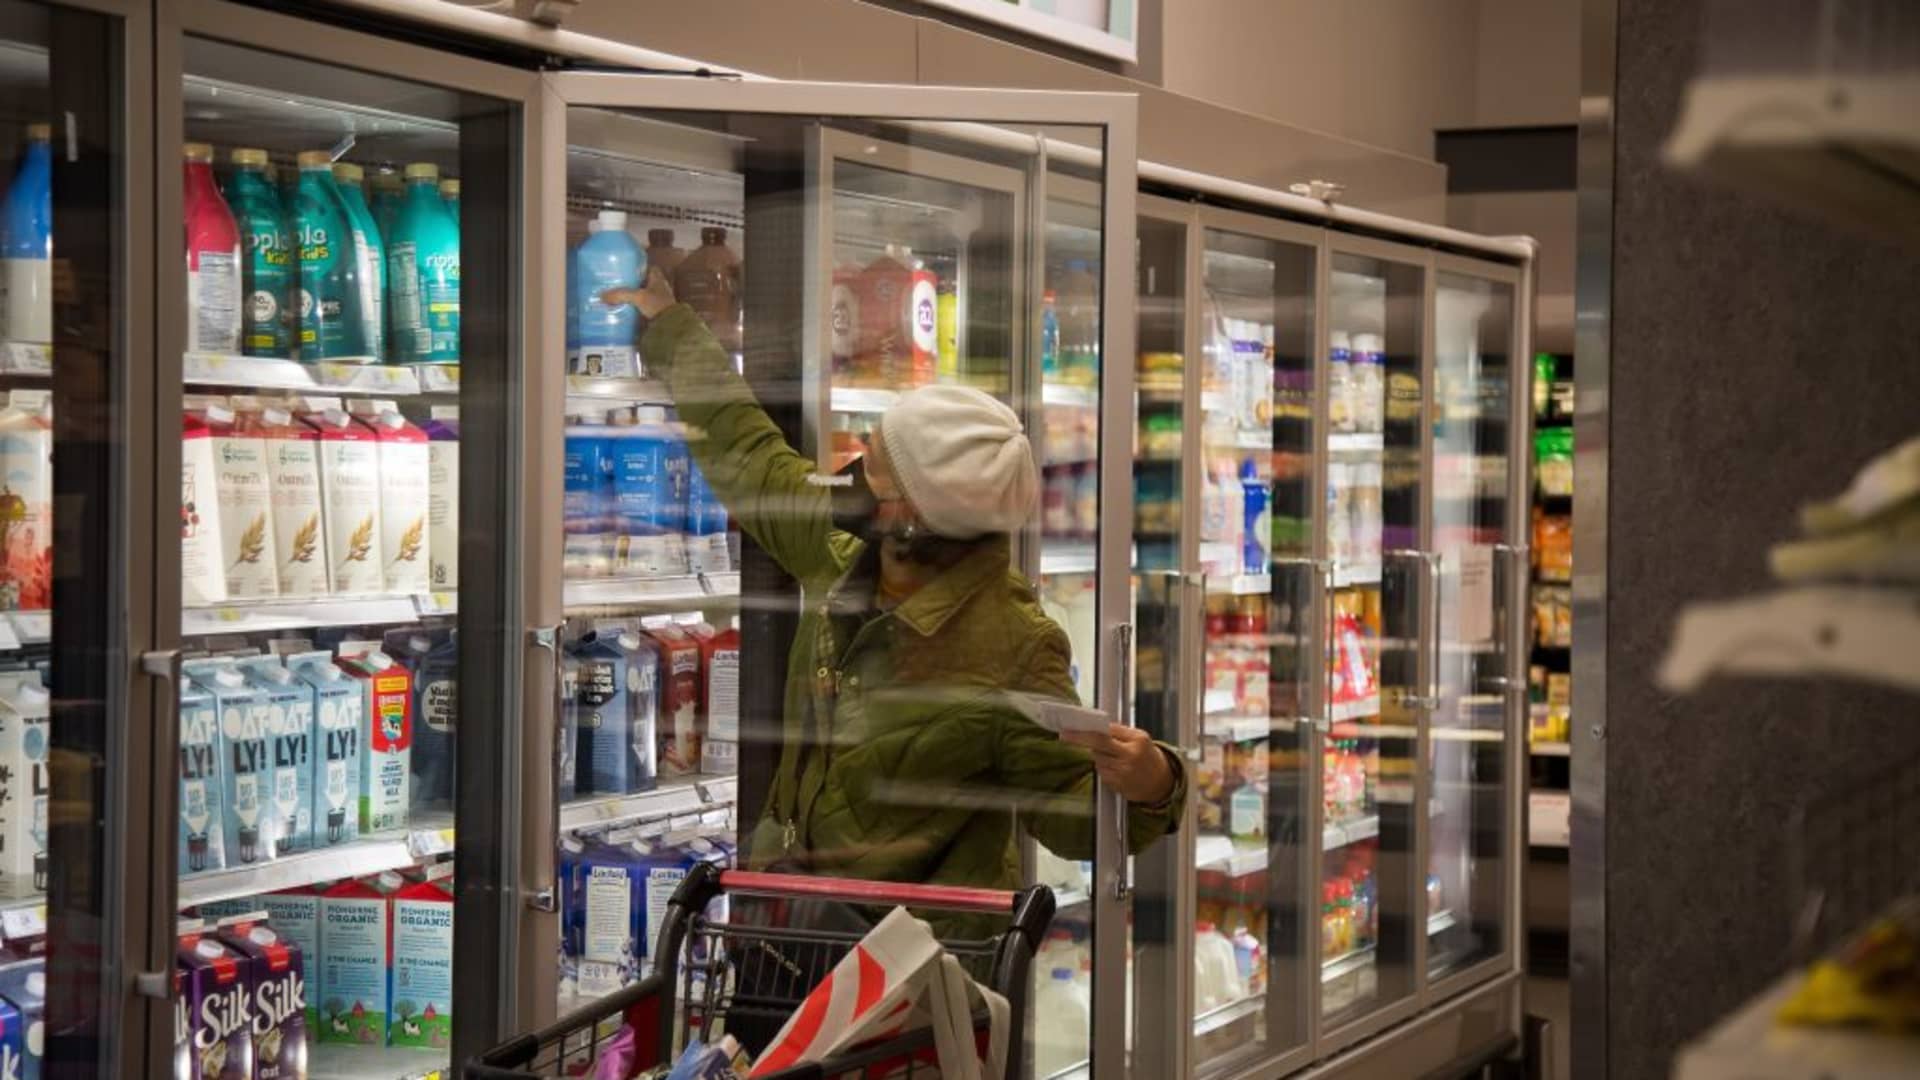 A customer shops at a grocery store in Brooklyn, New York, on Feb. 14, 2023.